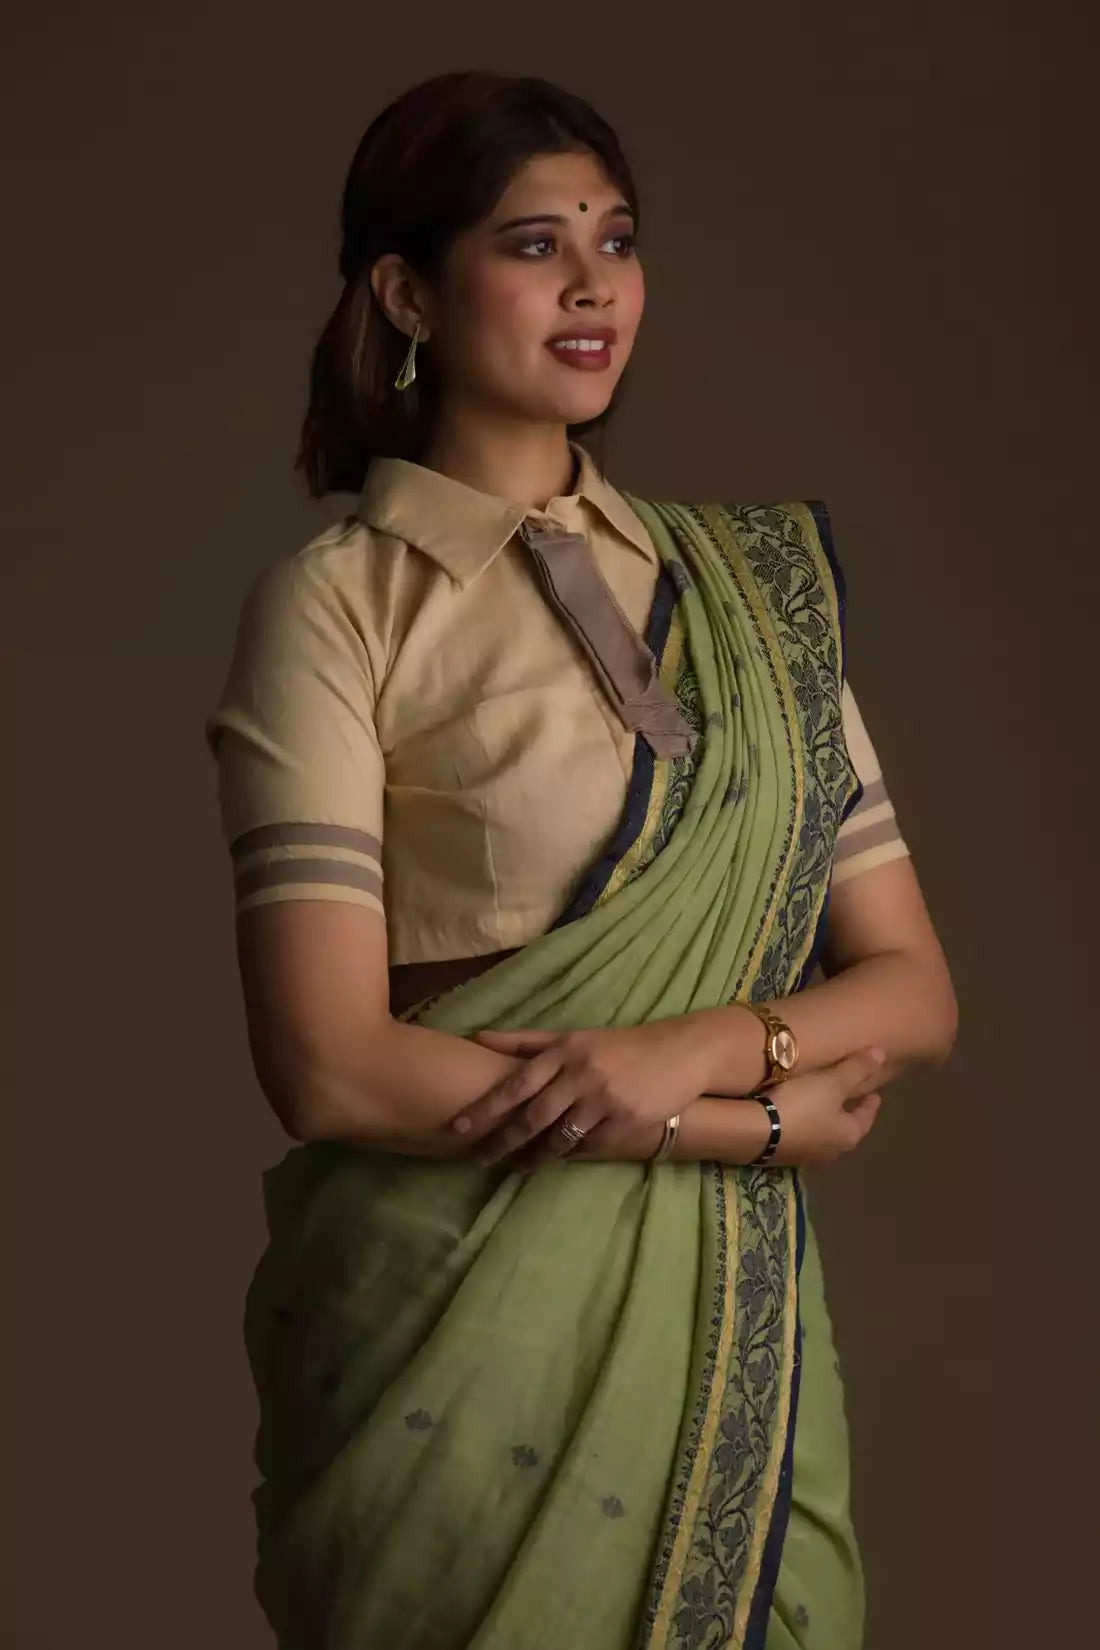 A lady in Myrtle Linen Saree in Olive Green, womens workwear standing against a tan background sidewaysn